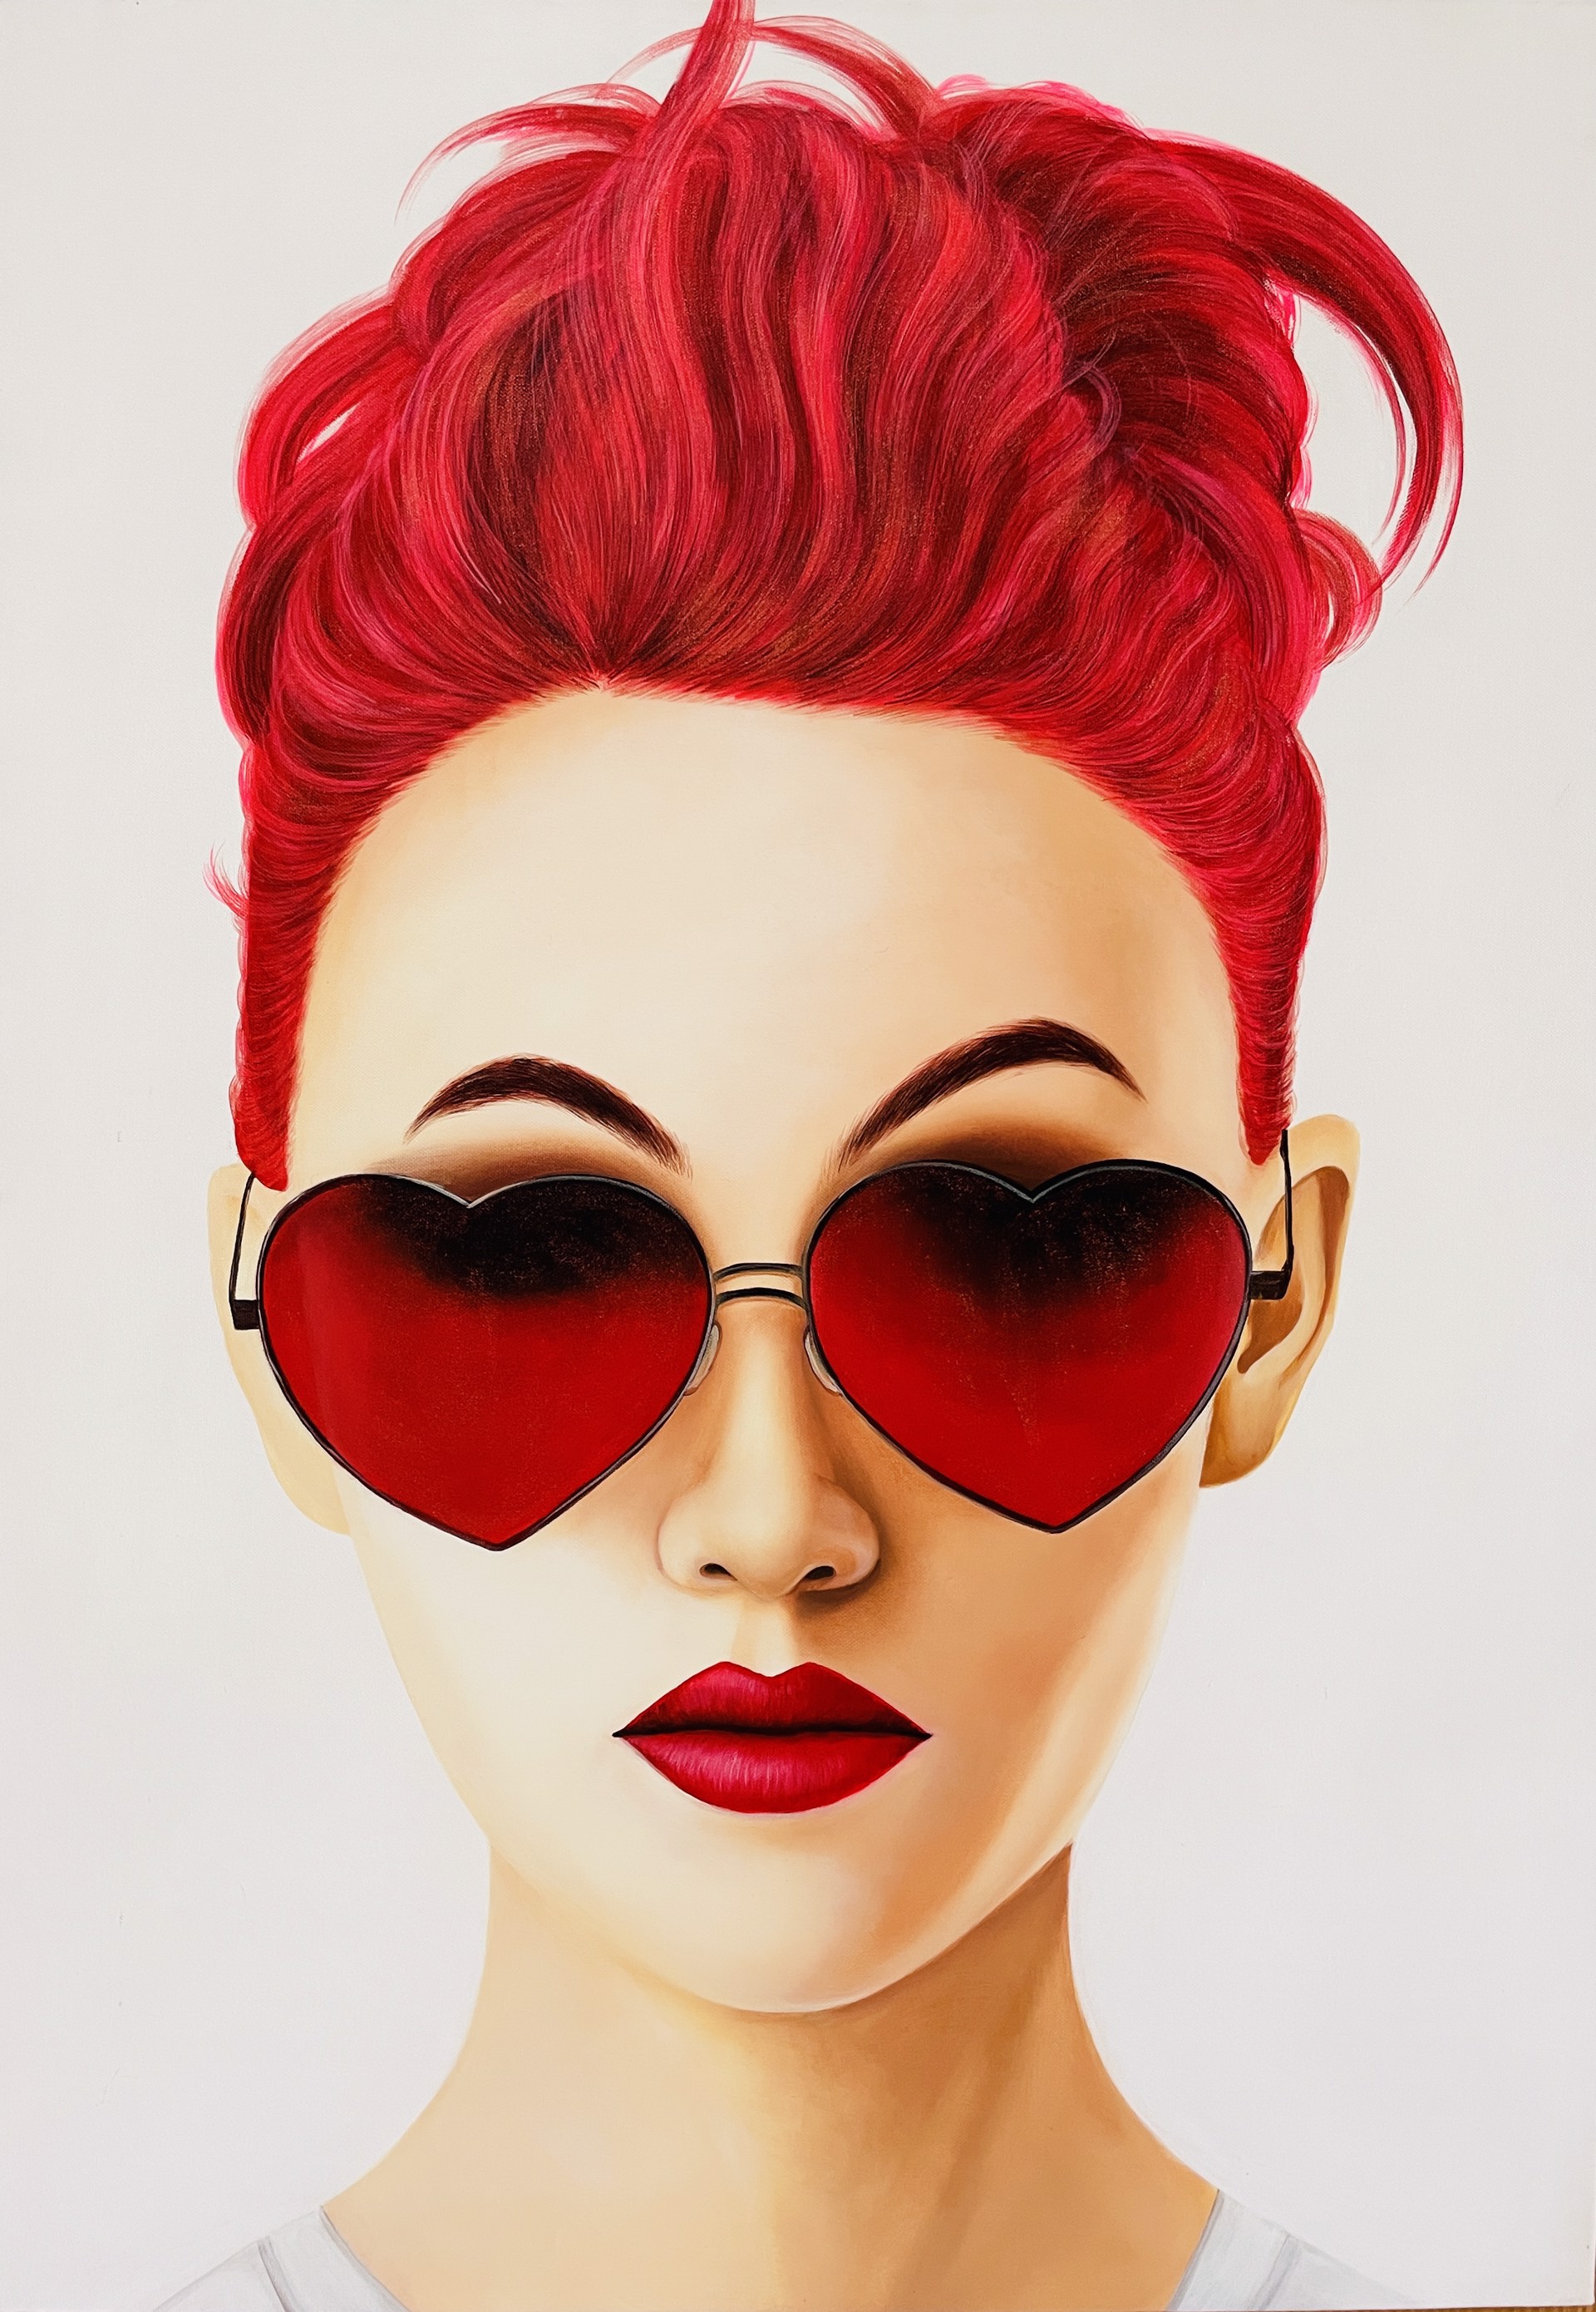 Girl in Red Sunglasses by Roni M